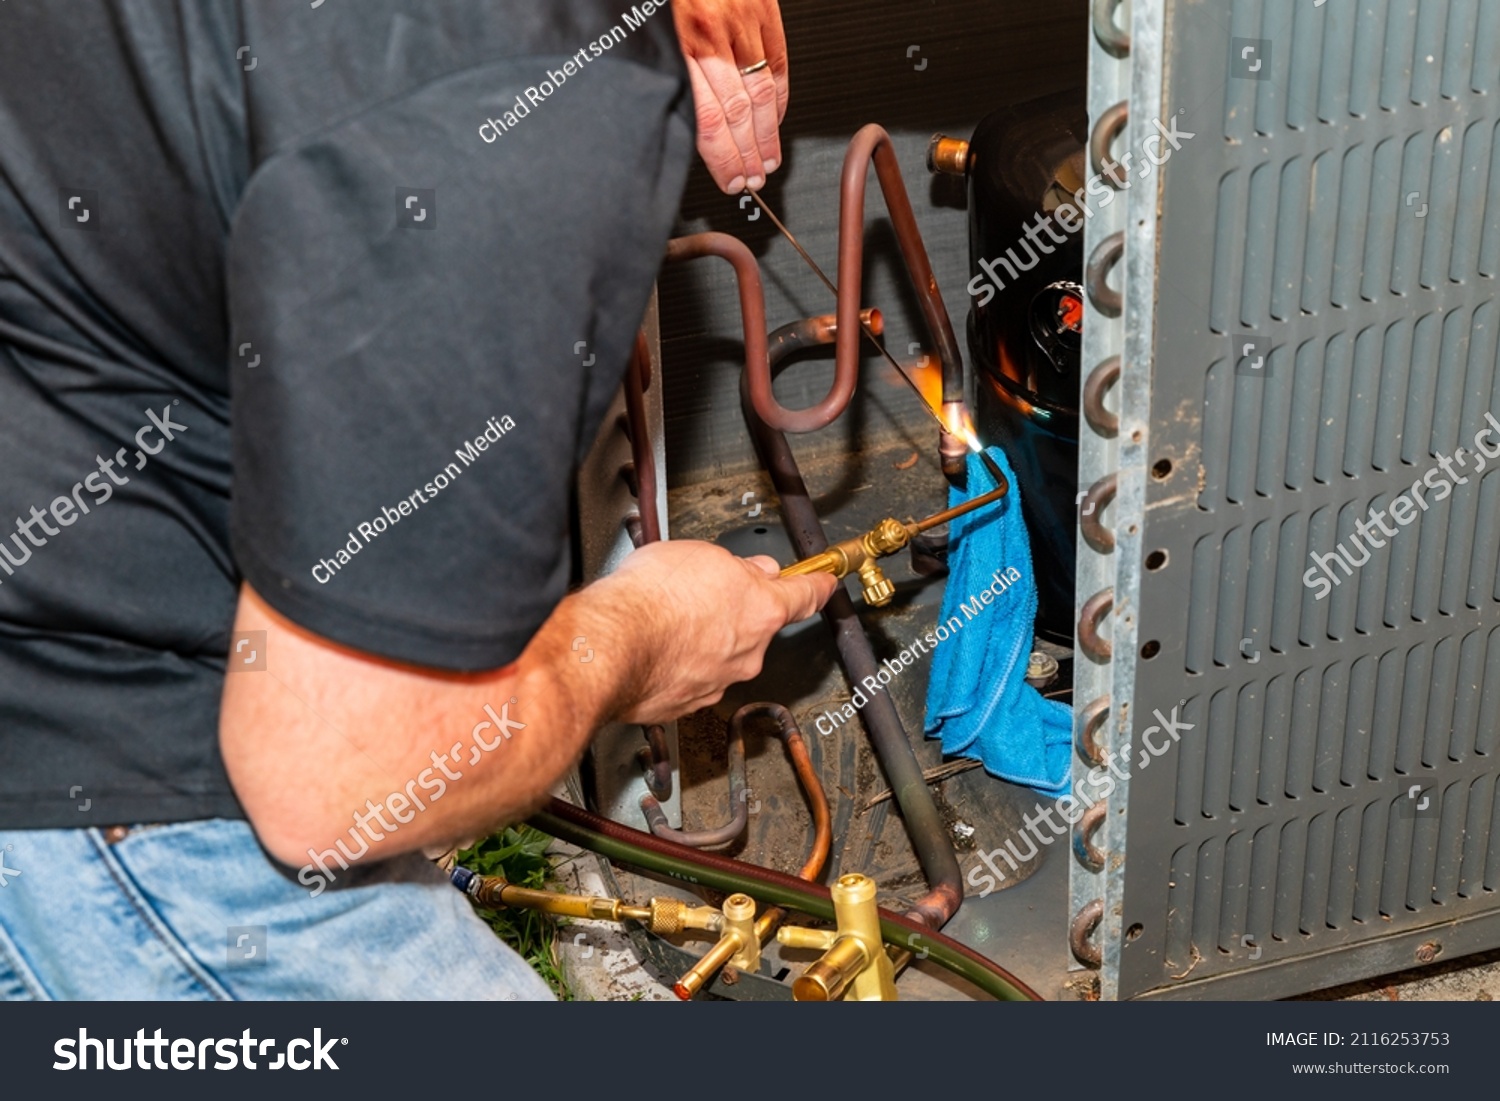 Maintenance worked uses and oxygen Acetylene torch to braze copper tubing on an air conditioner system #2116253753